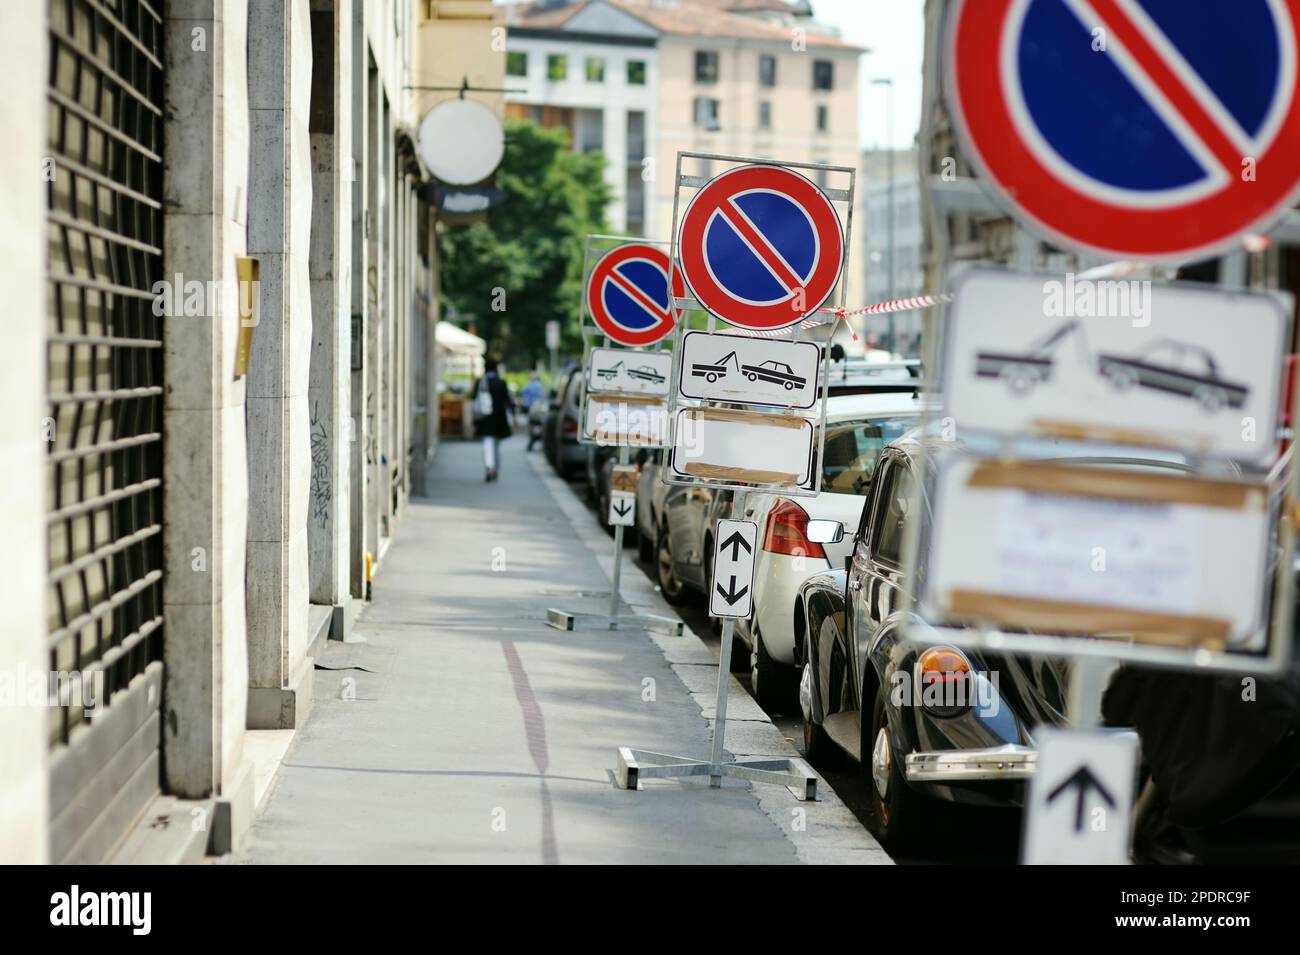 Row of cars parked illegally on street in the center of Milan, a metropolis in Italy's northern Lombardy region. Milan, Lombardy, Italy. Stock Photo